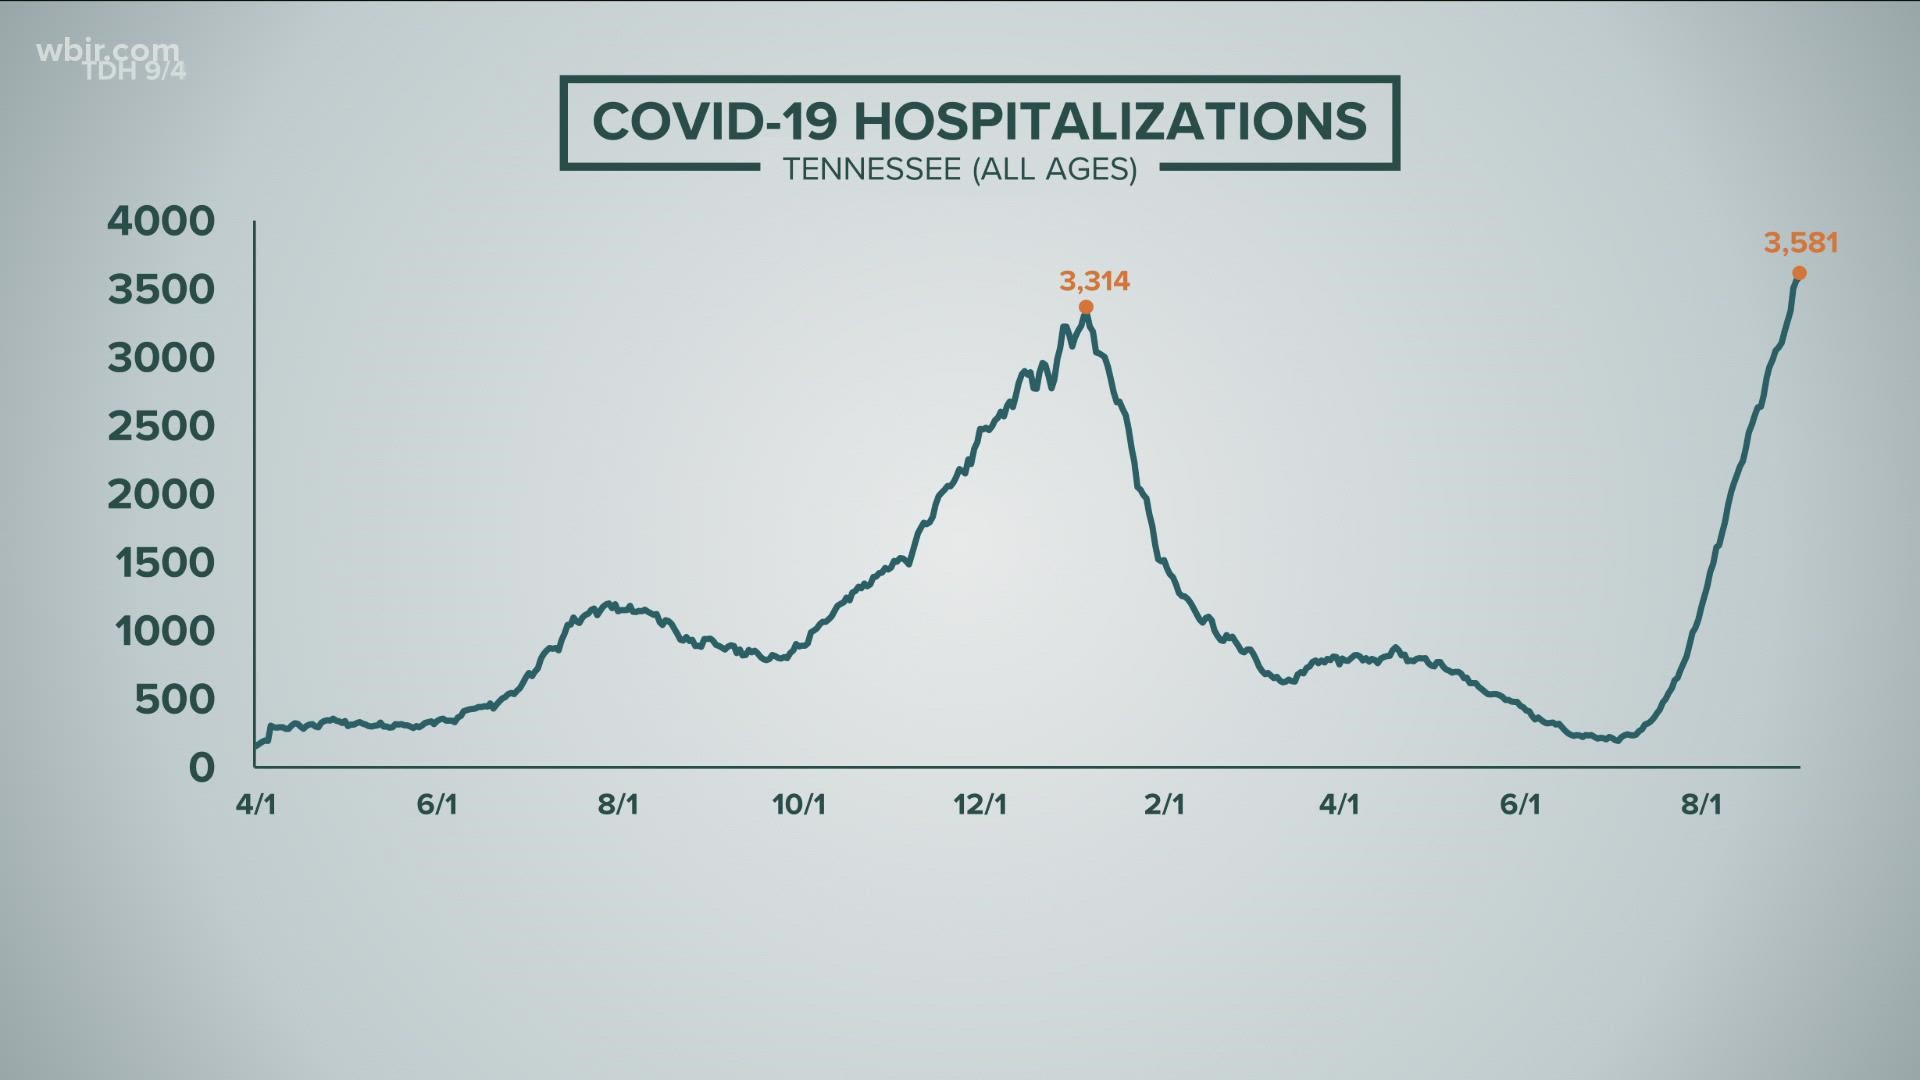 Tennessee has hit record new highs in the COVID-19 pandemic.